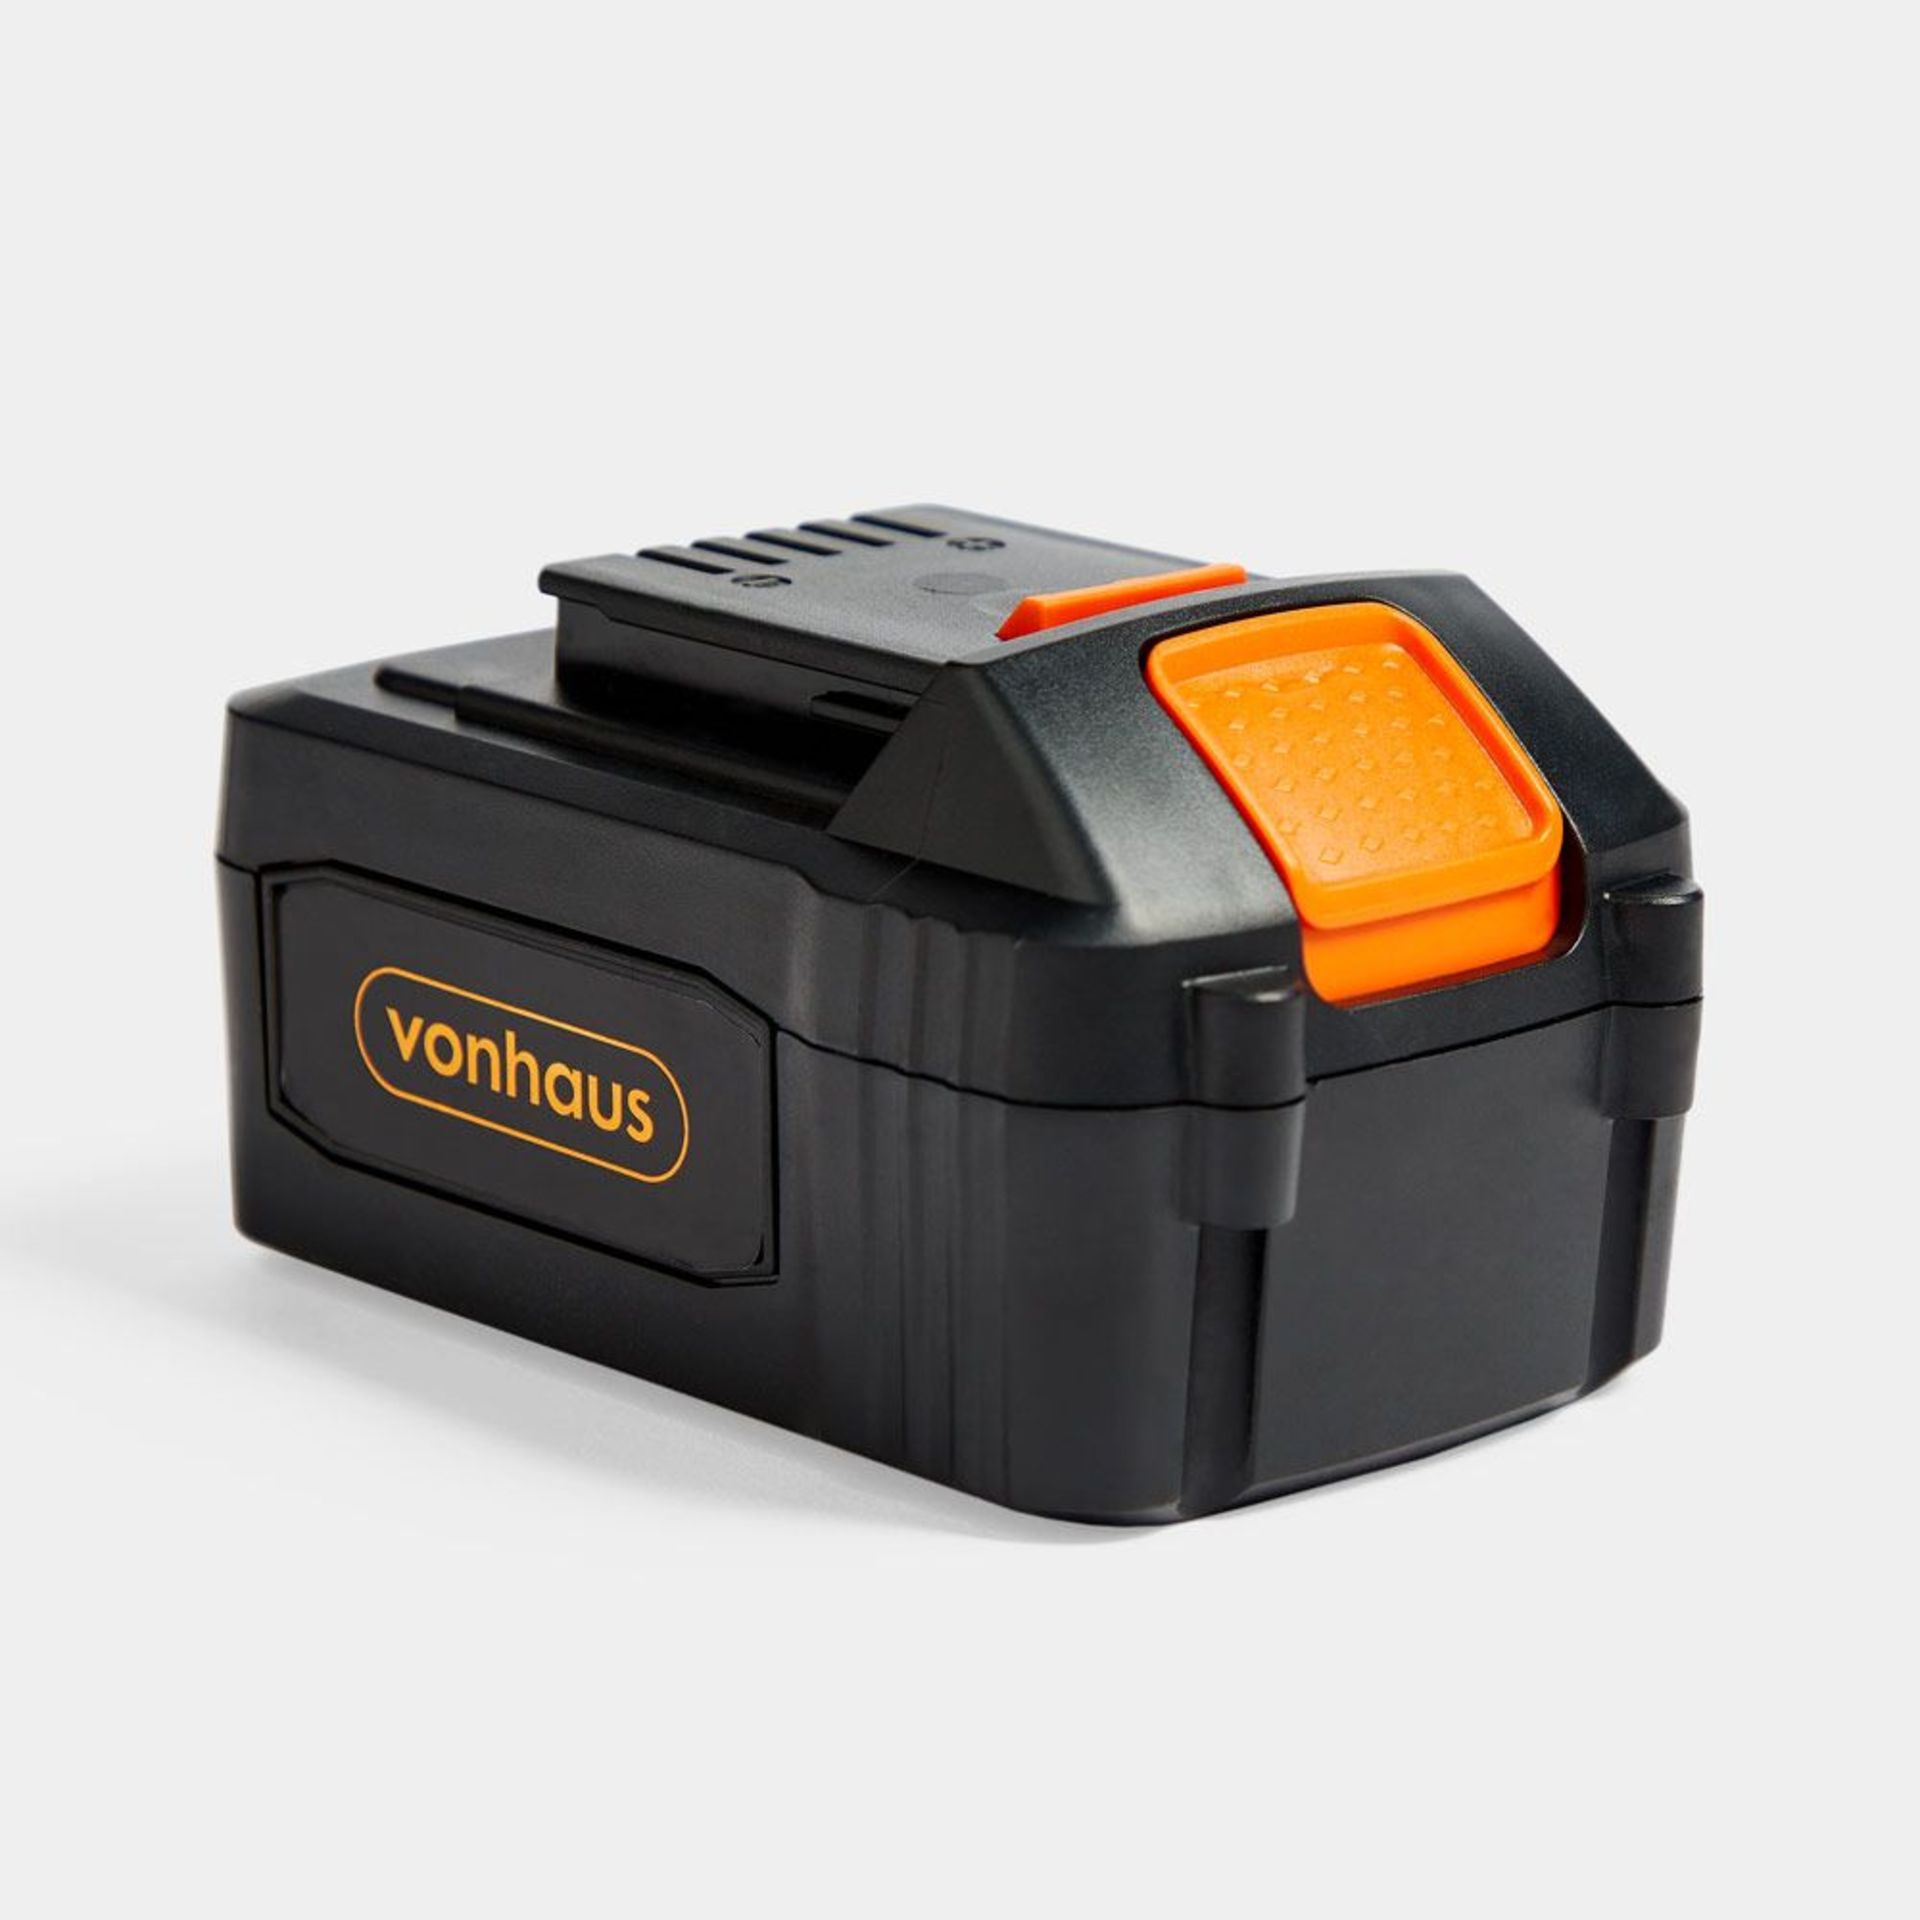 40V Range Spare Battery. - S2. Reaching full charge only 60 minutes when charged in our 40V Fast